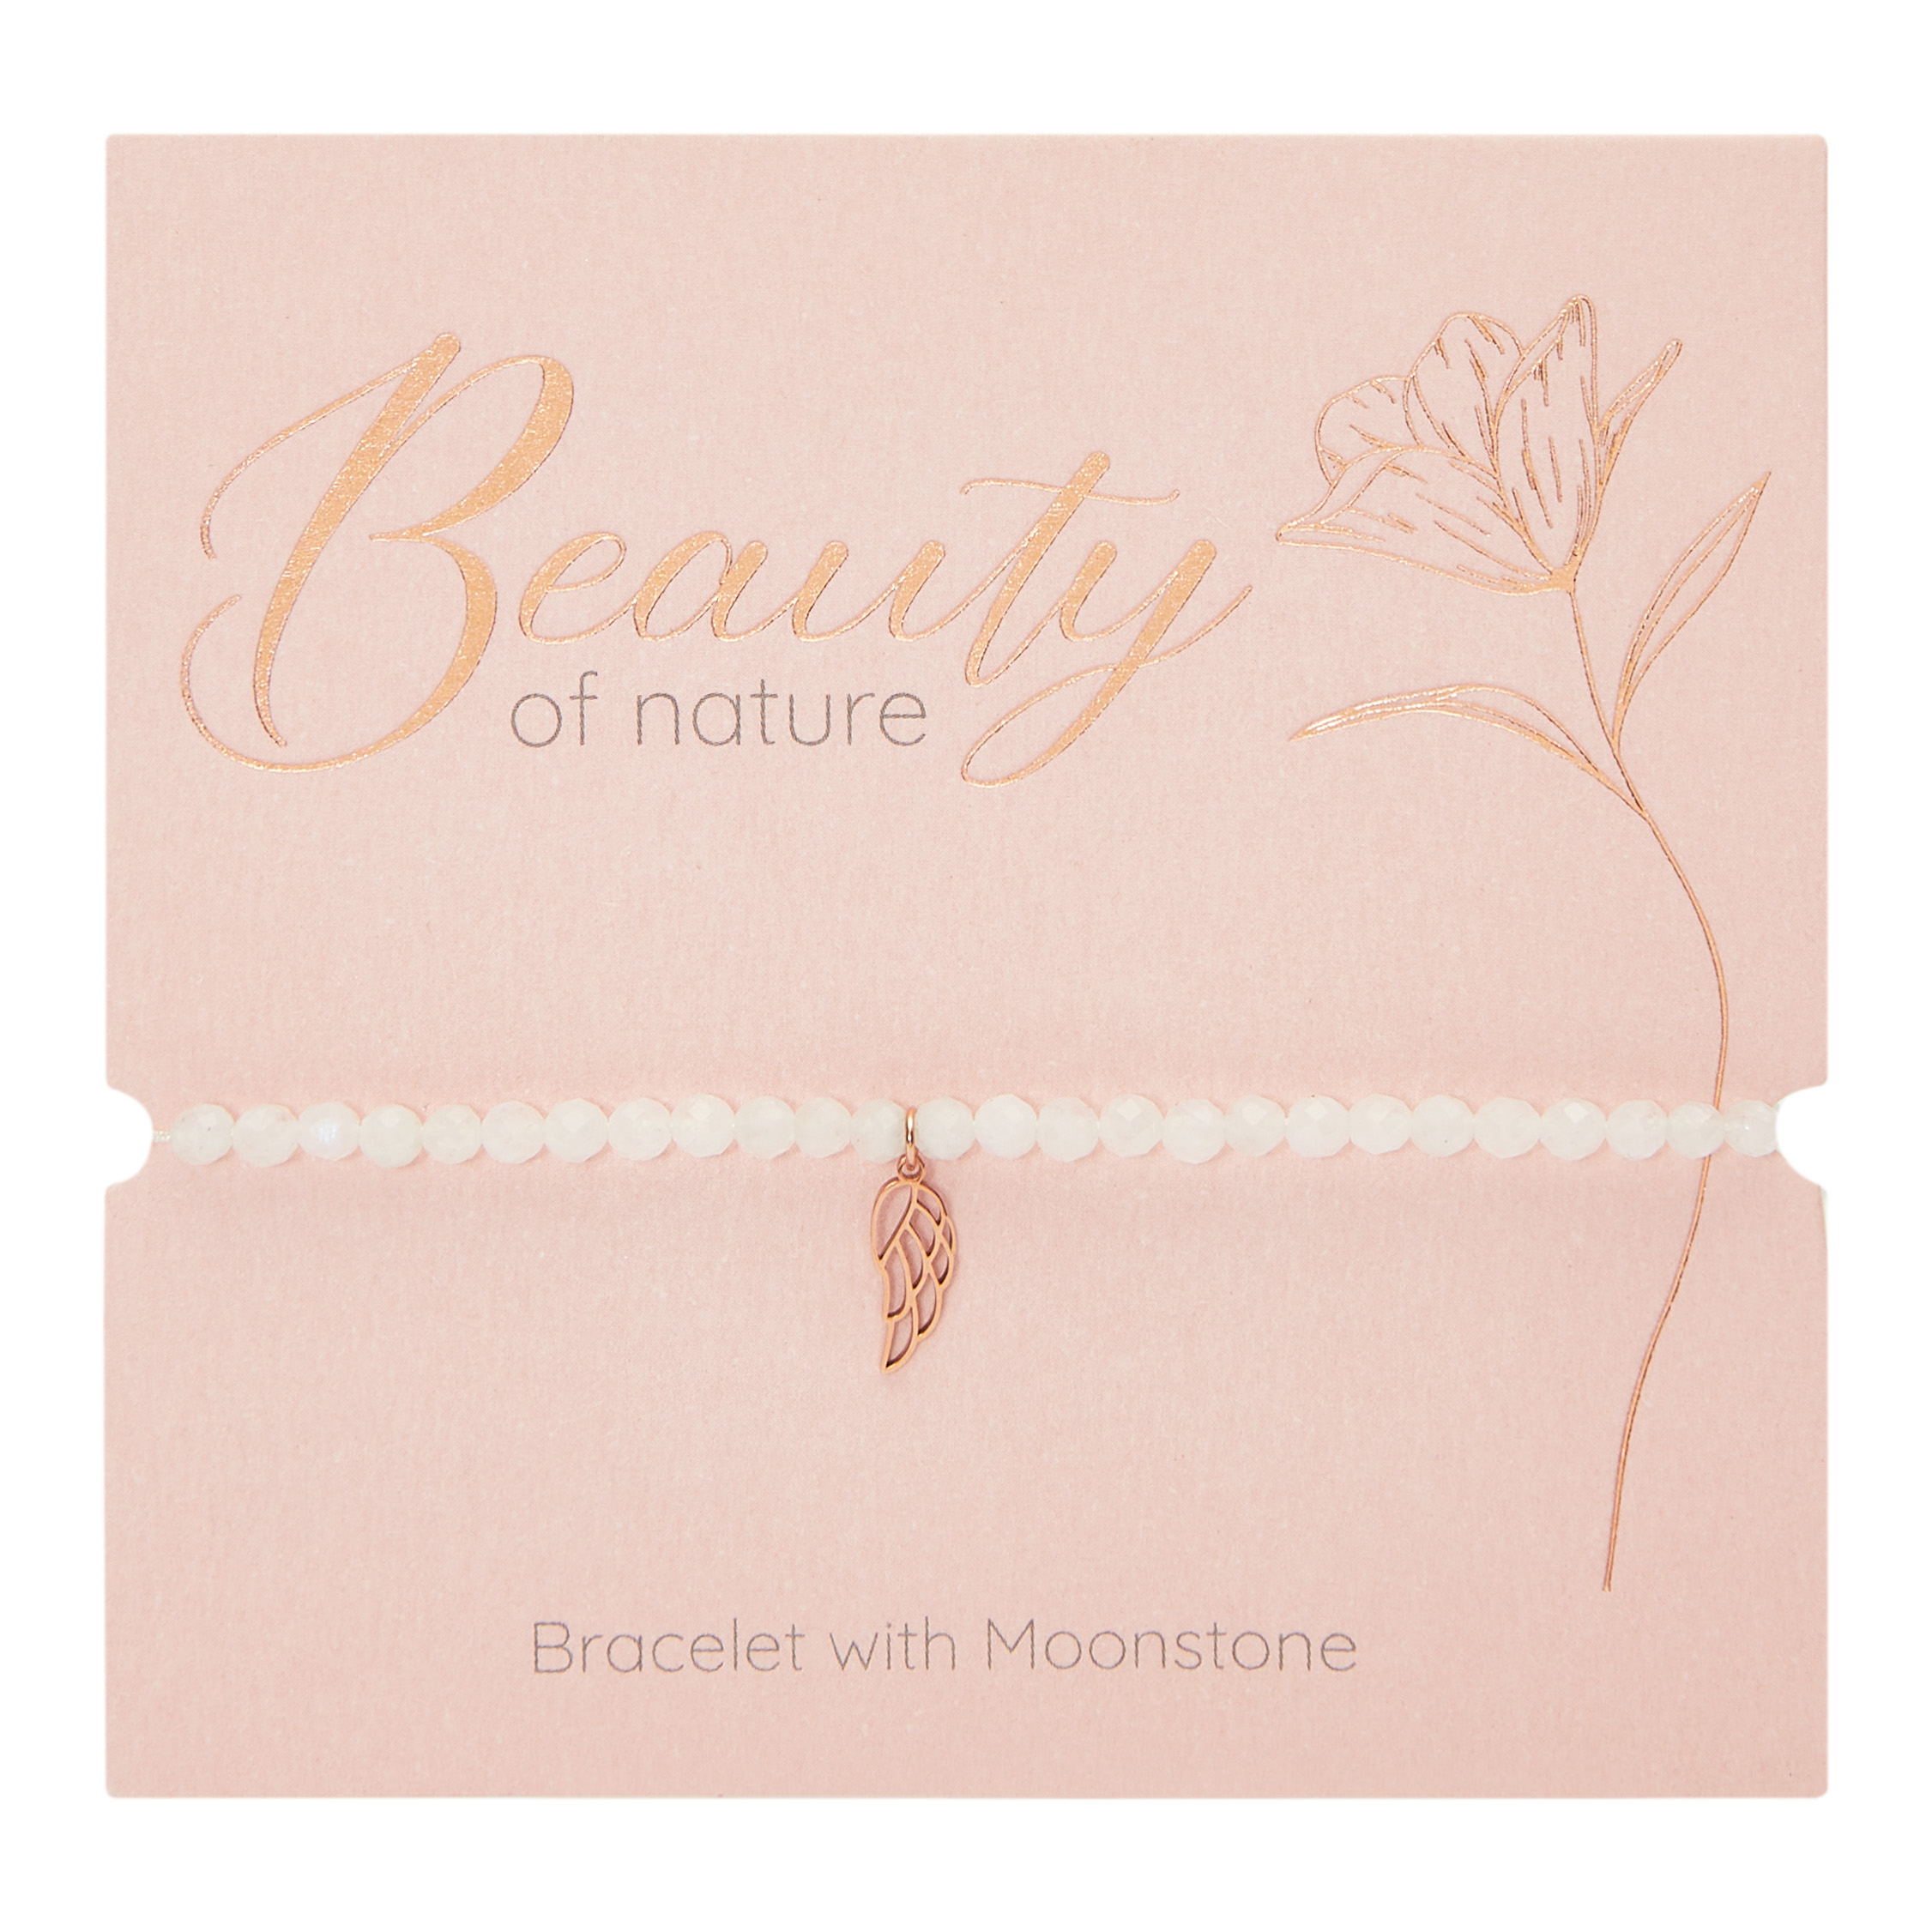 Package "Beauty of nature"